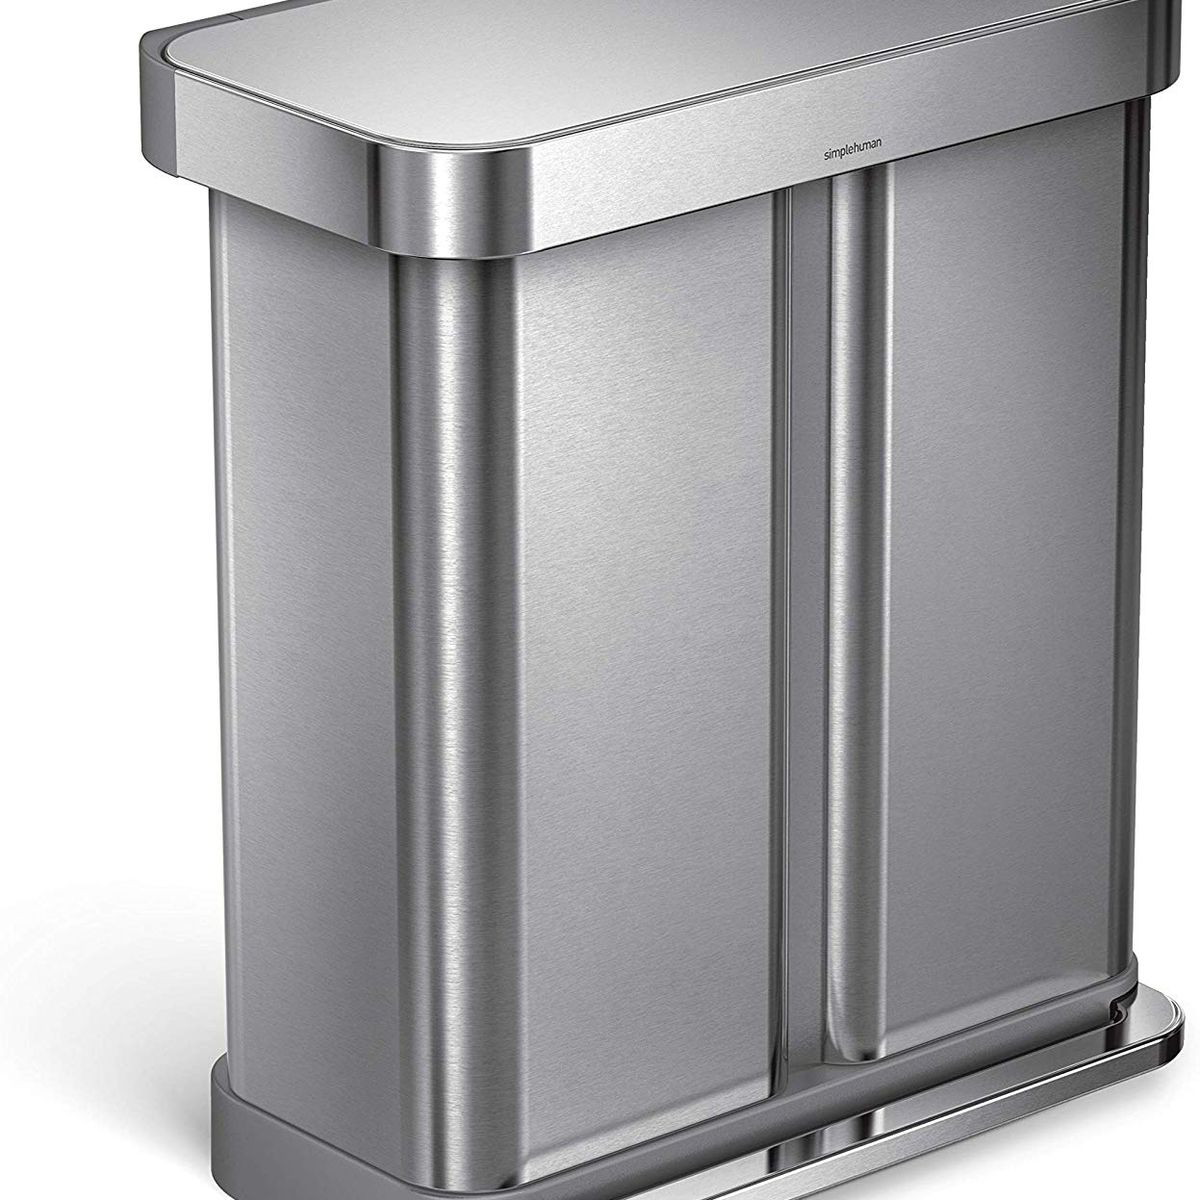 A silver double-wide trashcan. 